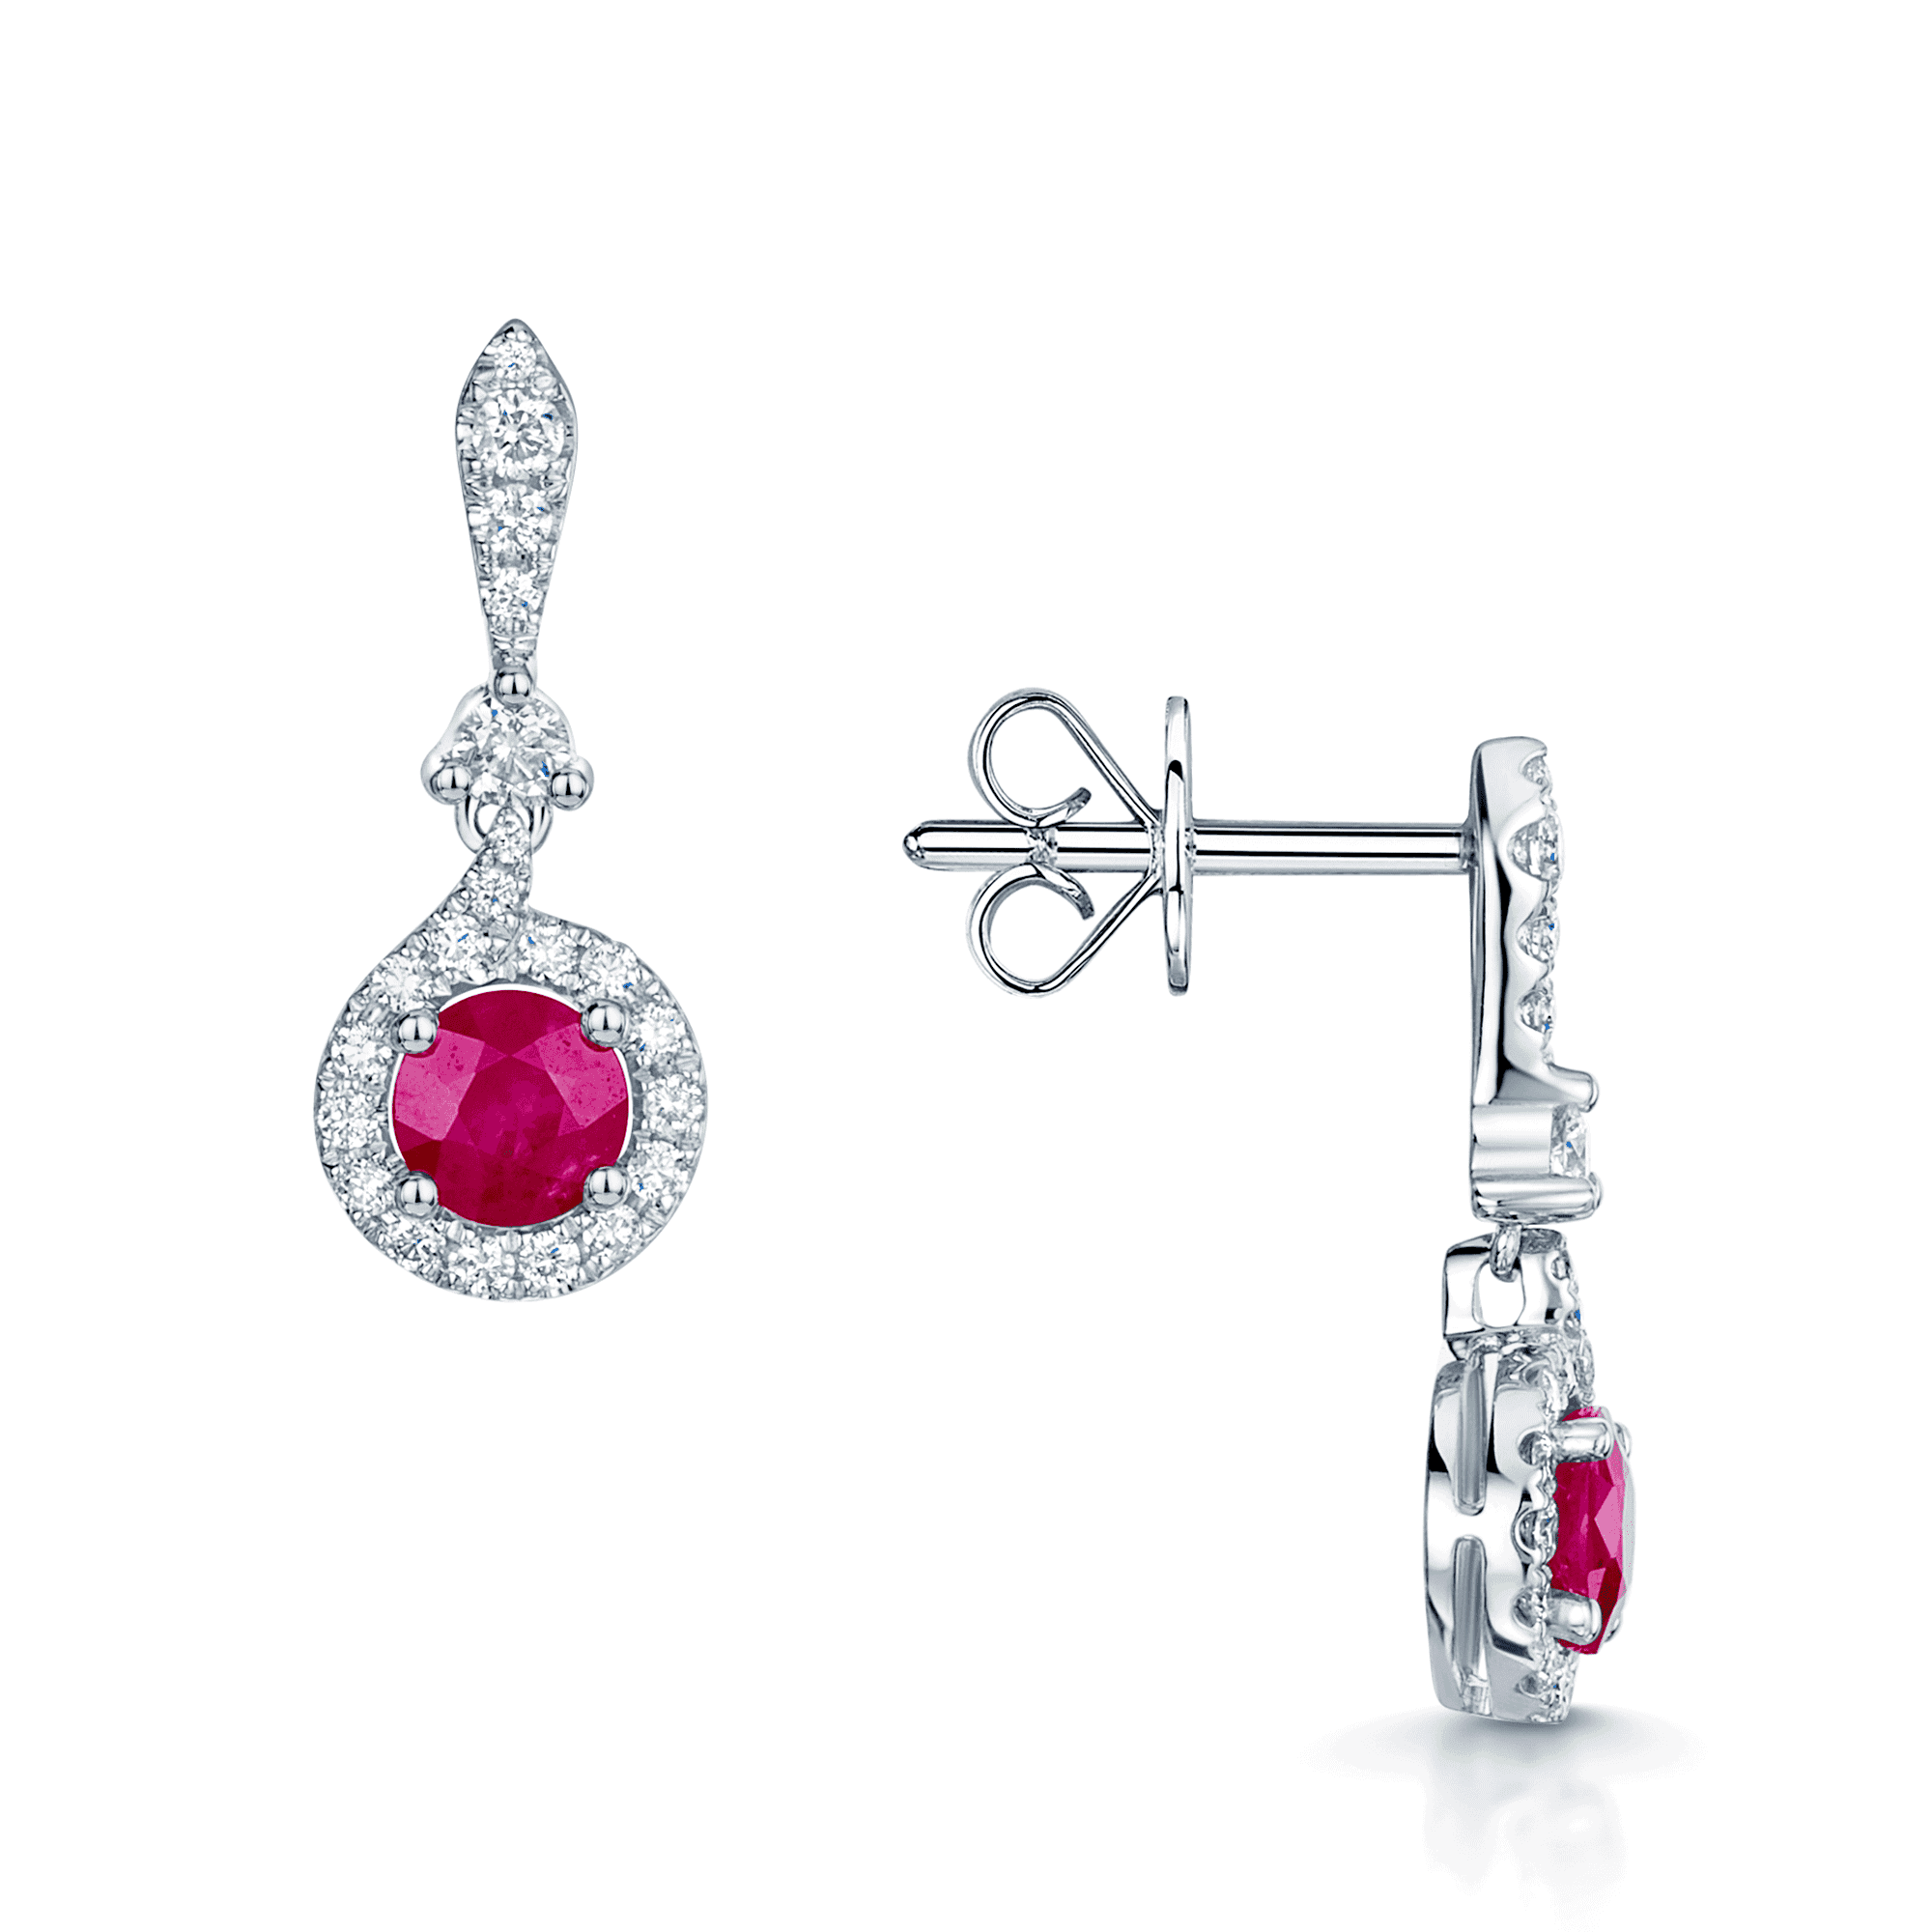 18ct White Gold Round Brilliant Cut Ruby And Diamond Halo Drop Earrings